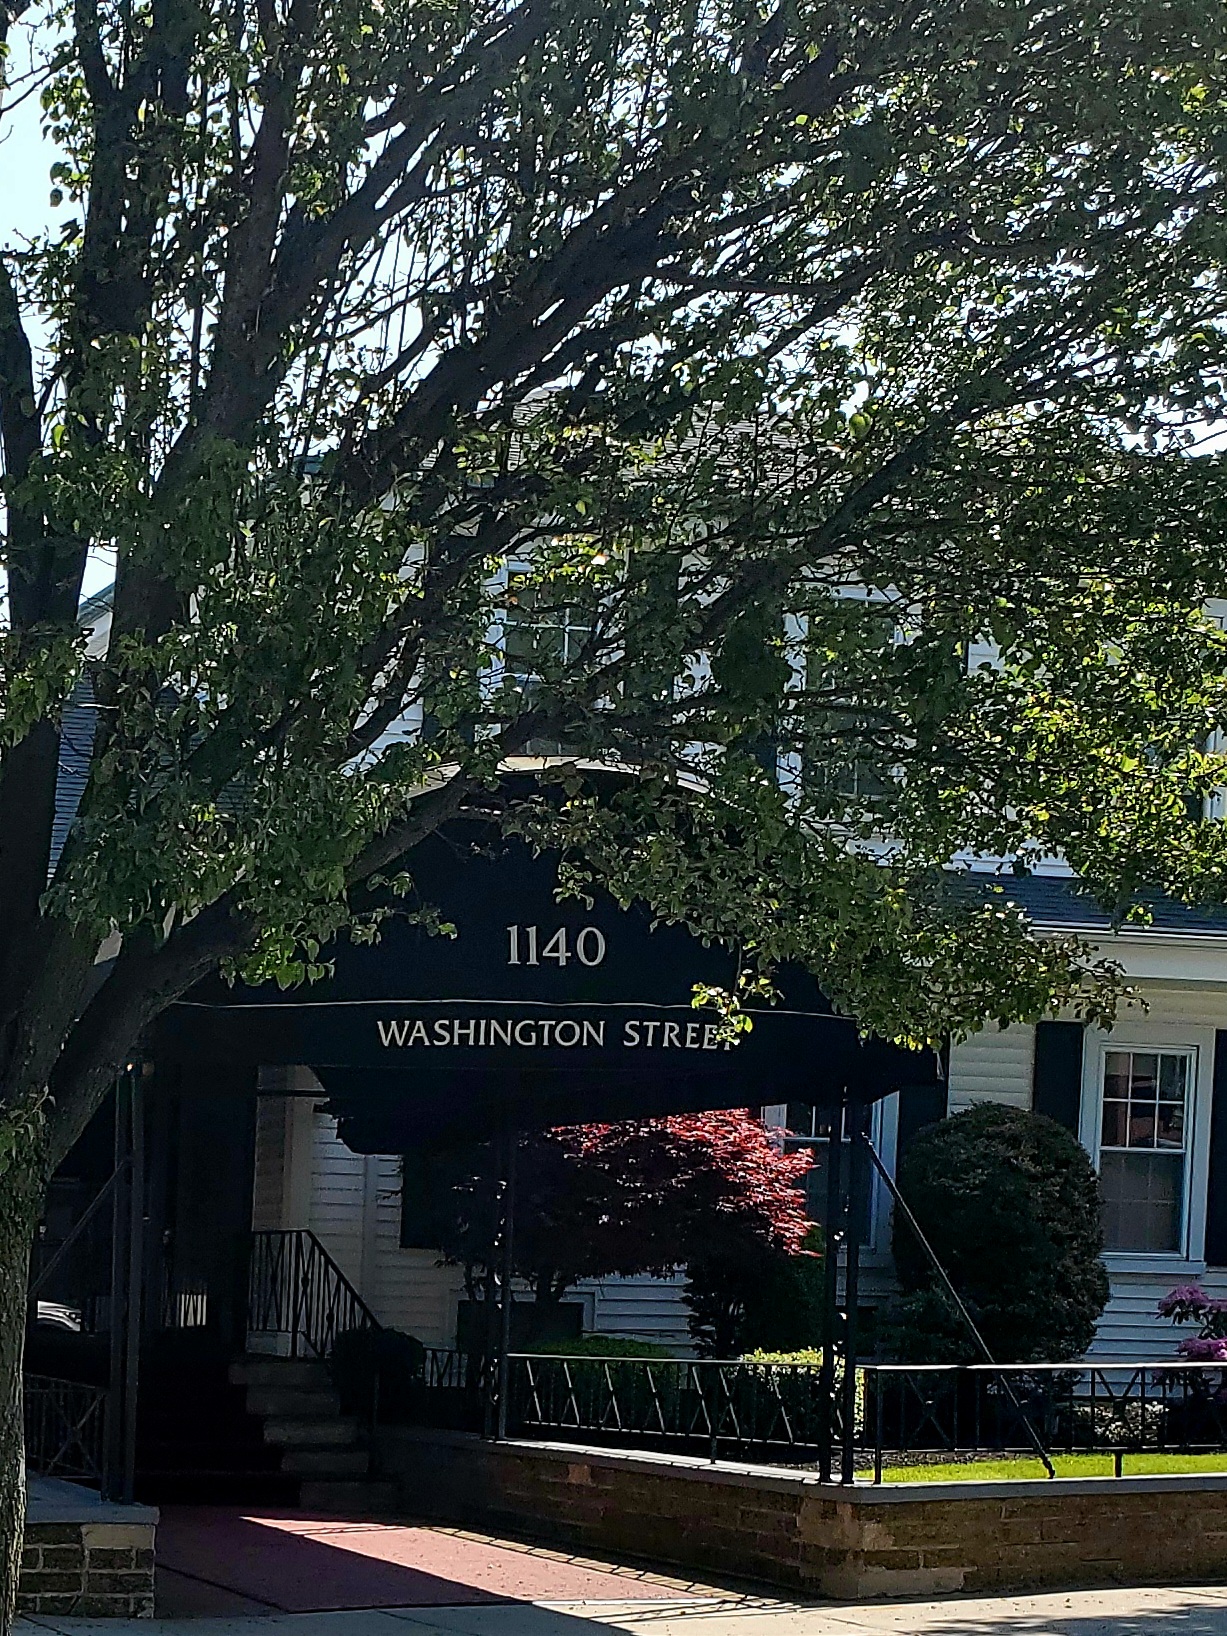 Dolan Funeral Homes and Cremation Services 460 Granite Ave, Milton Massachusetts 02186